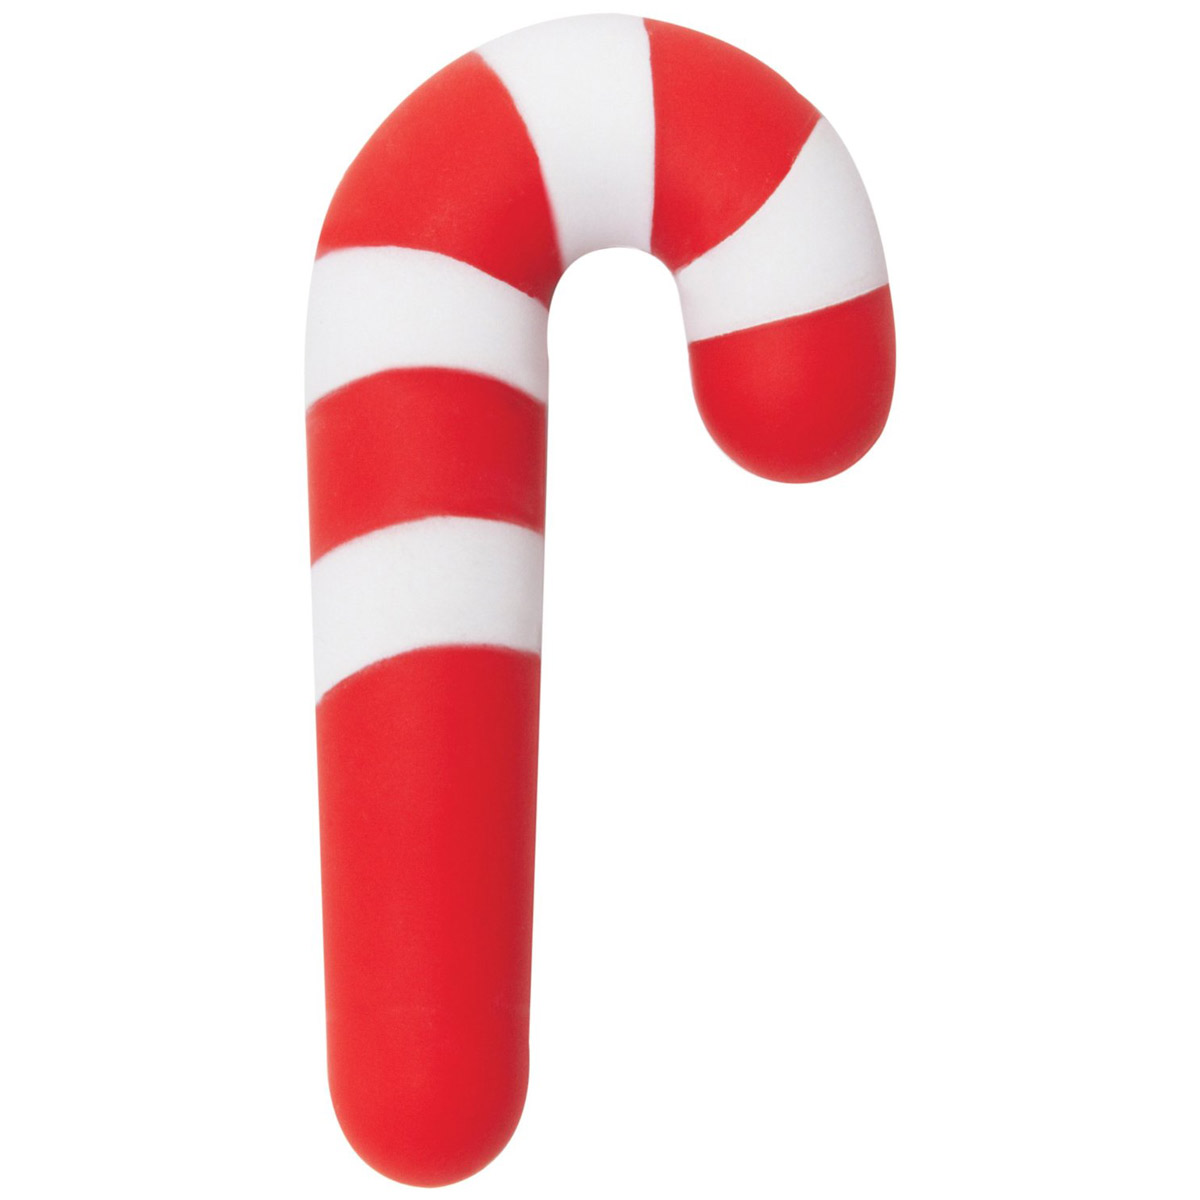 Candy Cane Bottle Stopper - The Green Head